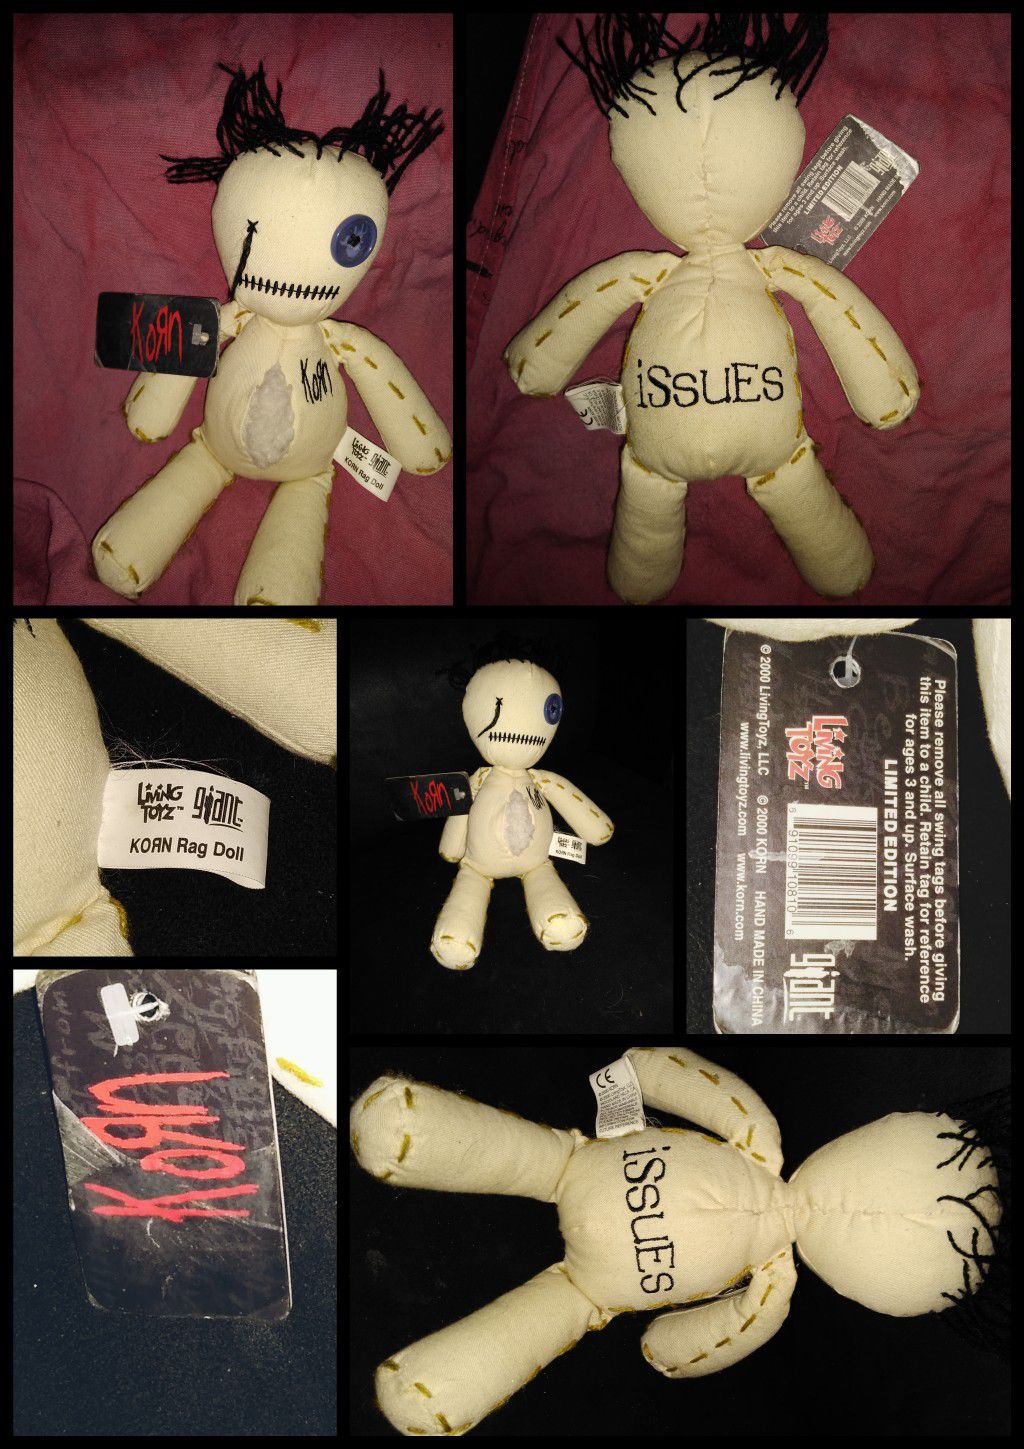 Korn Issues Doll